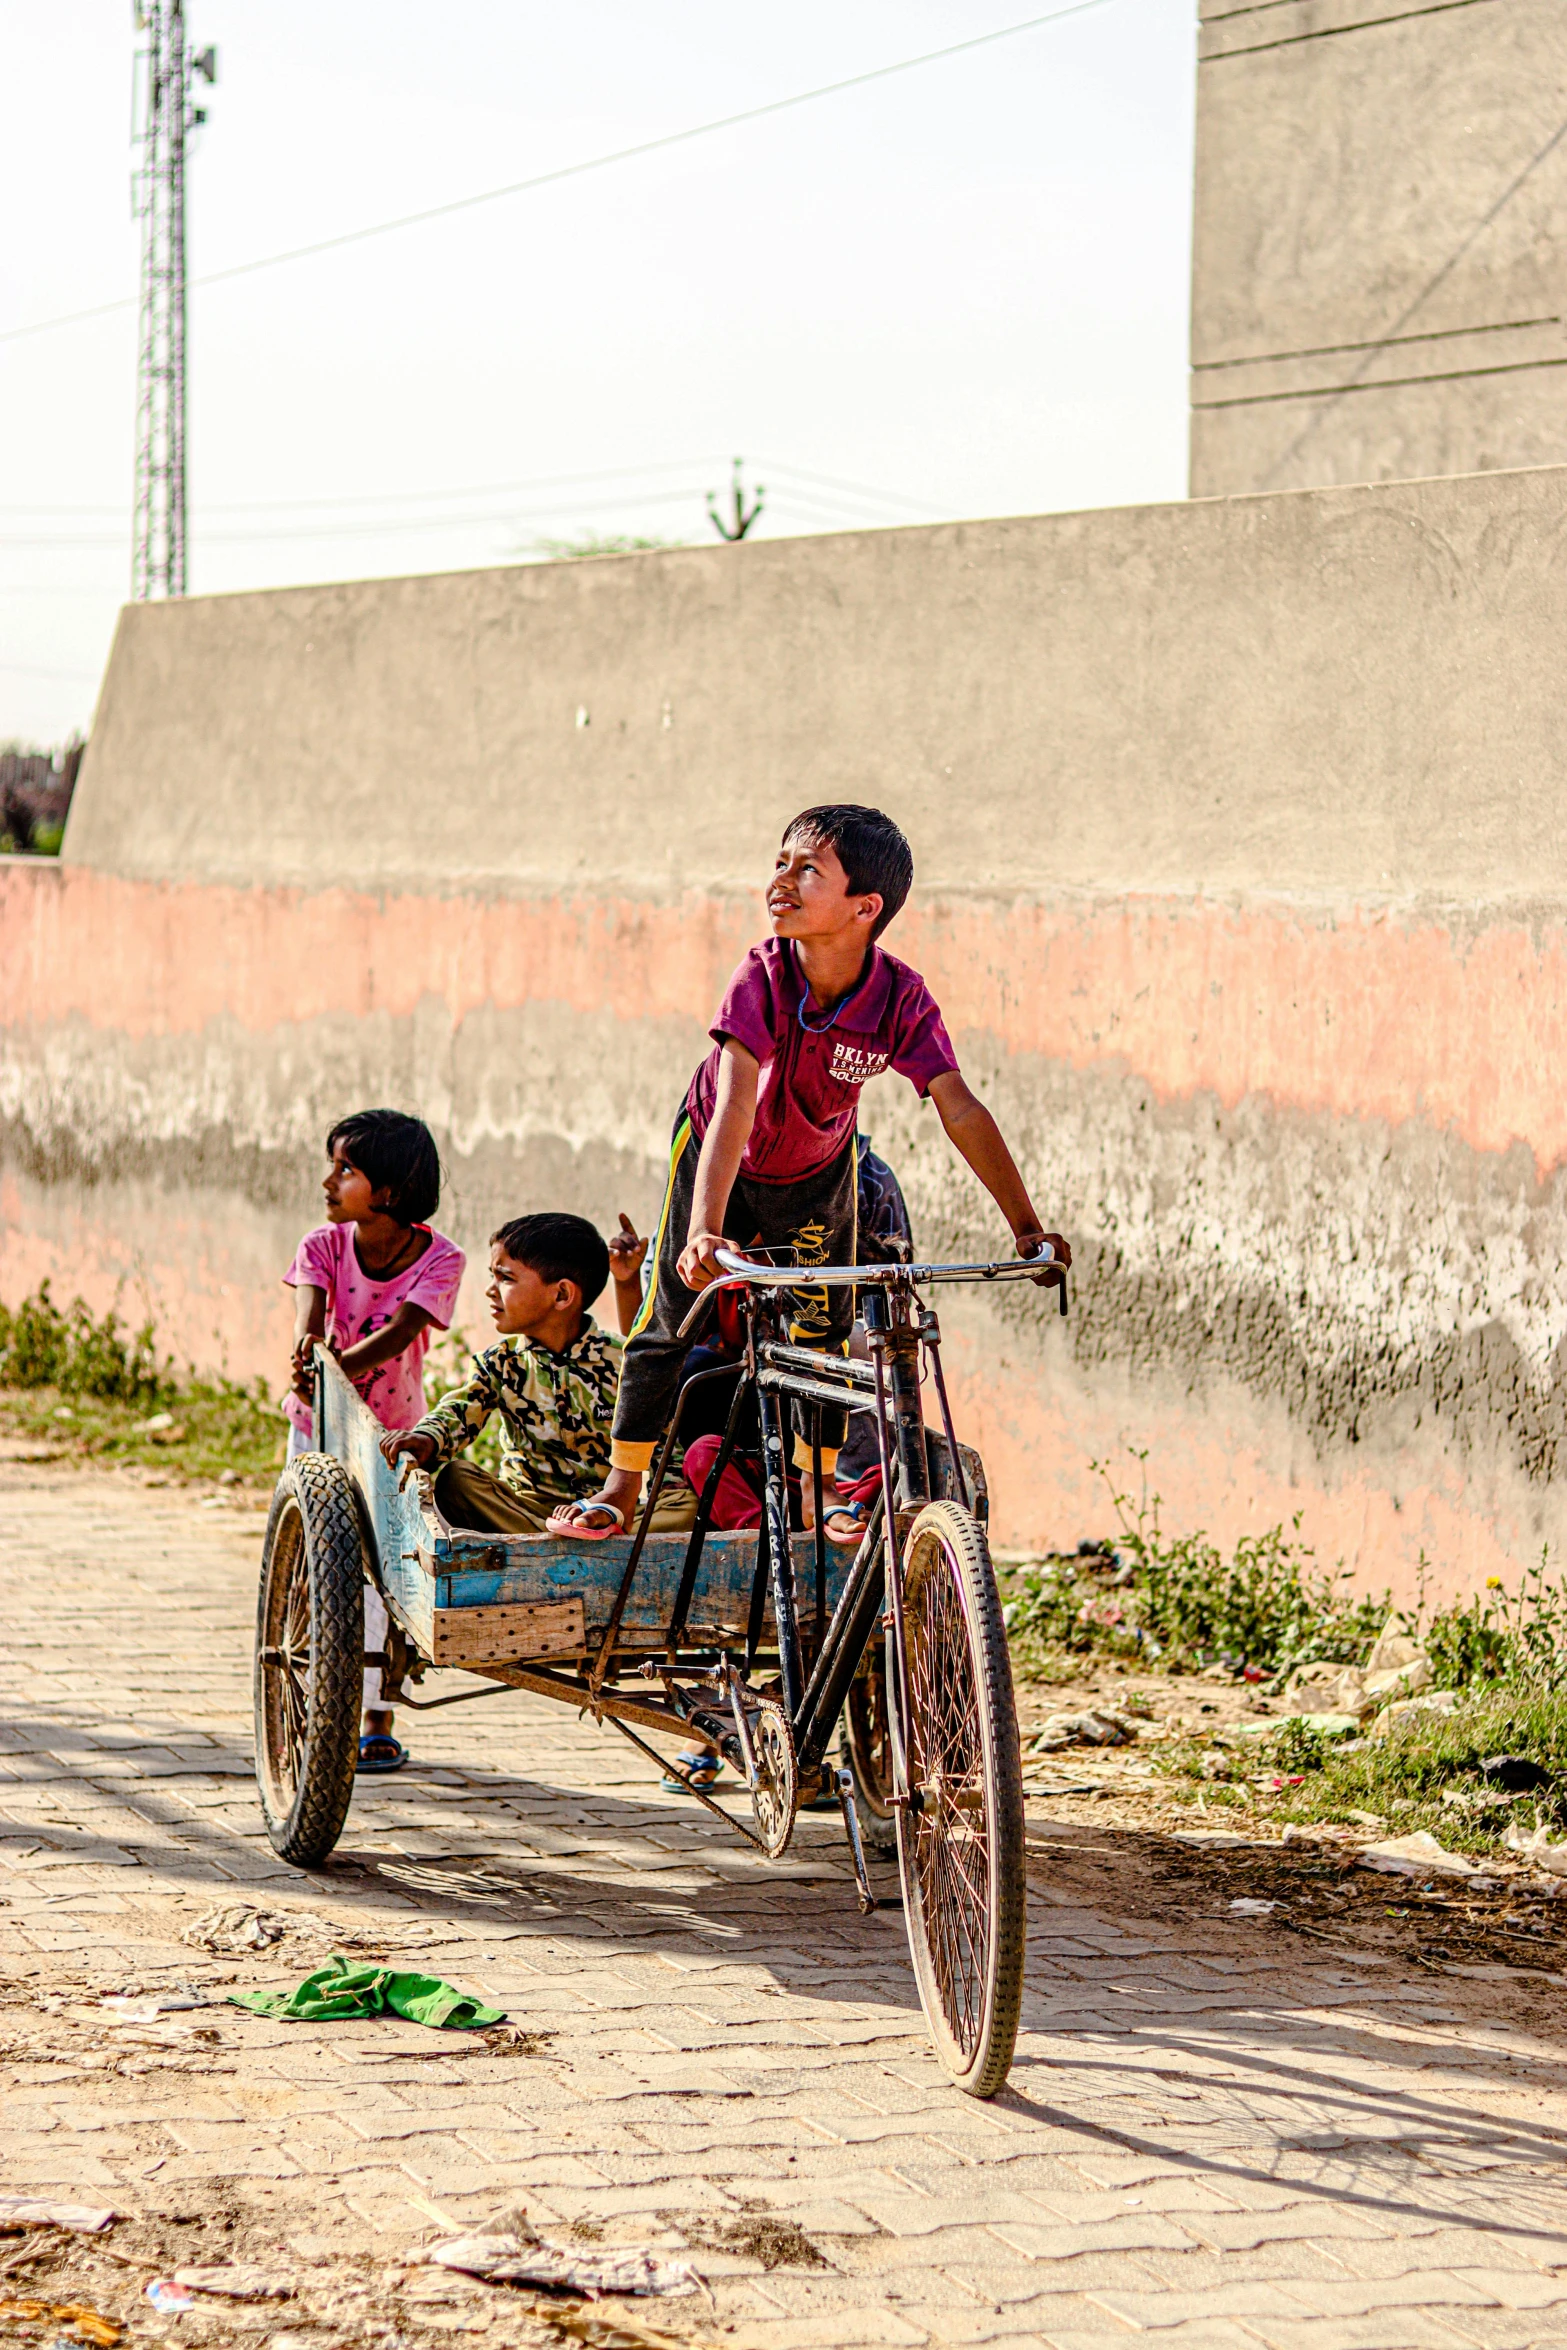 a group of children riding on the back of a bike, by Rajesh Soni, pexels contest winner, on a village, cart, baotou china, sunny day time